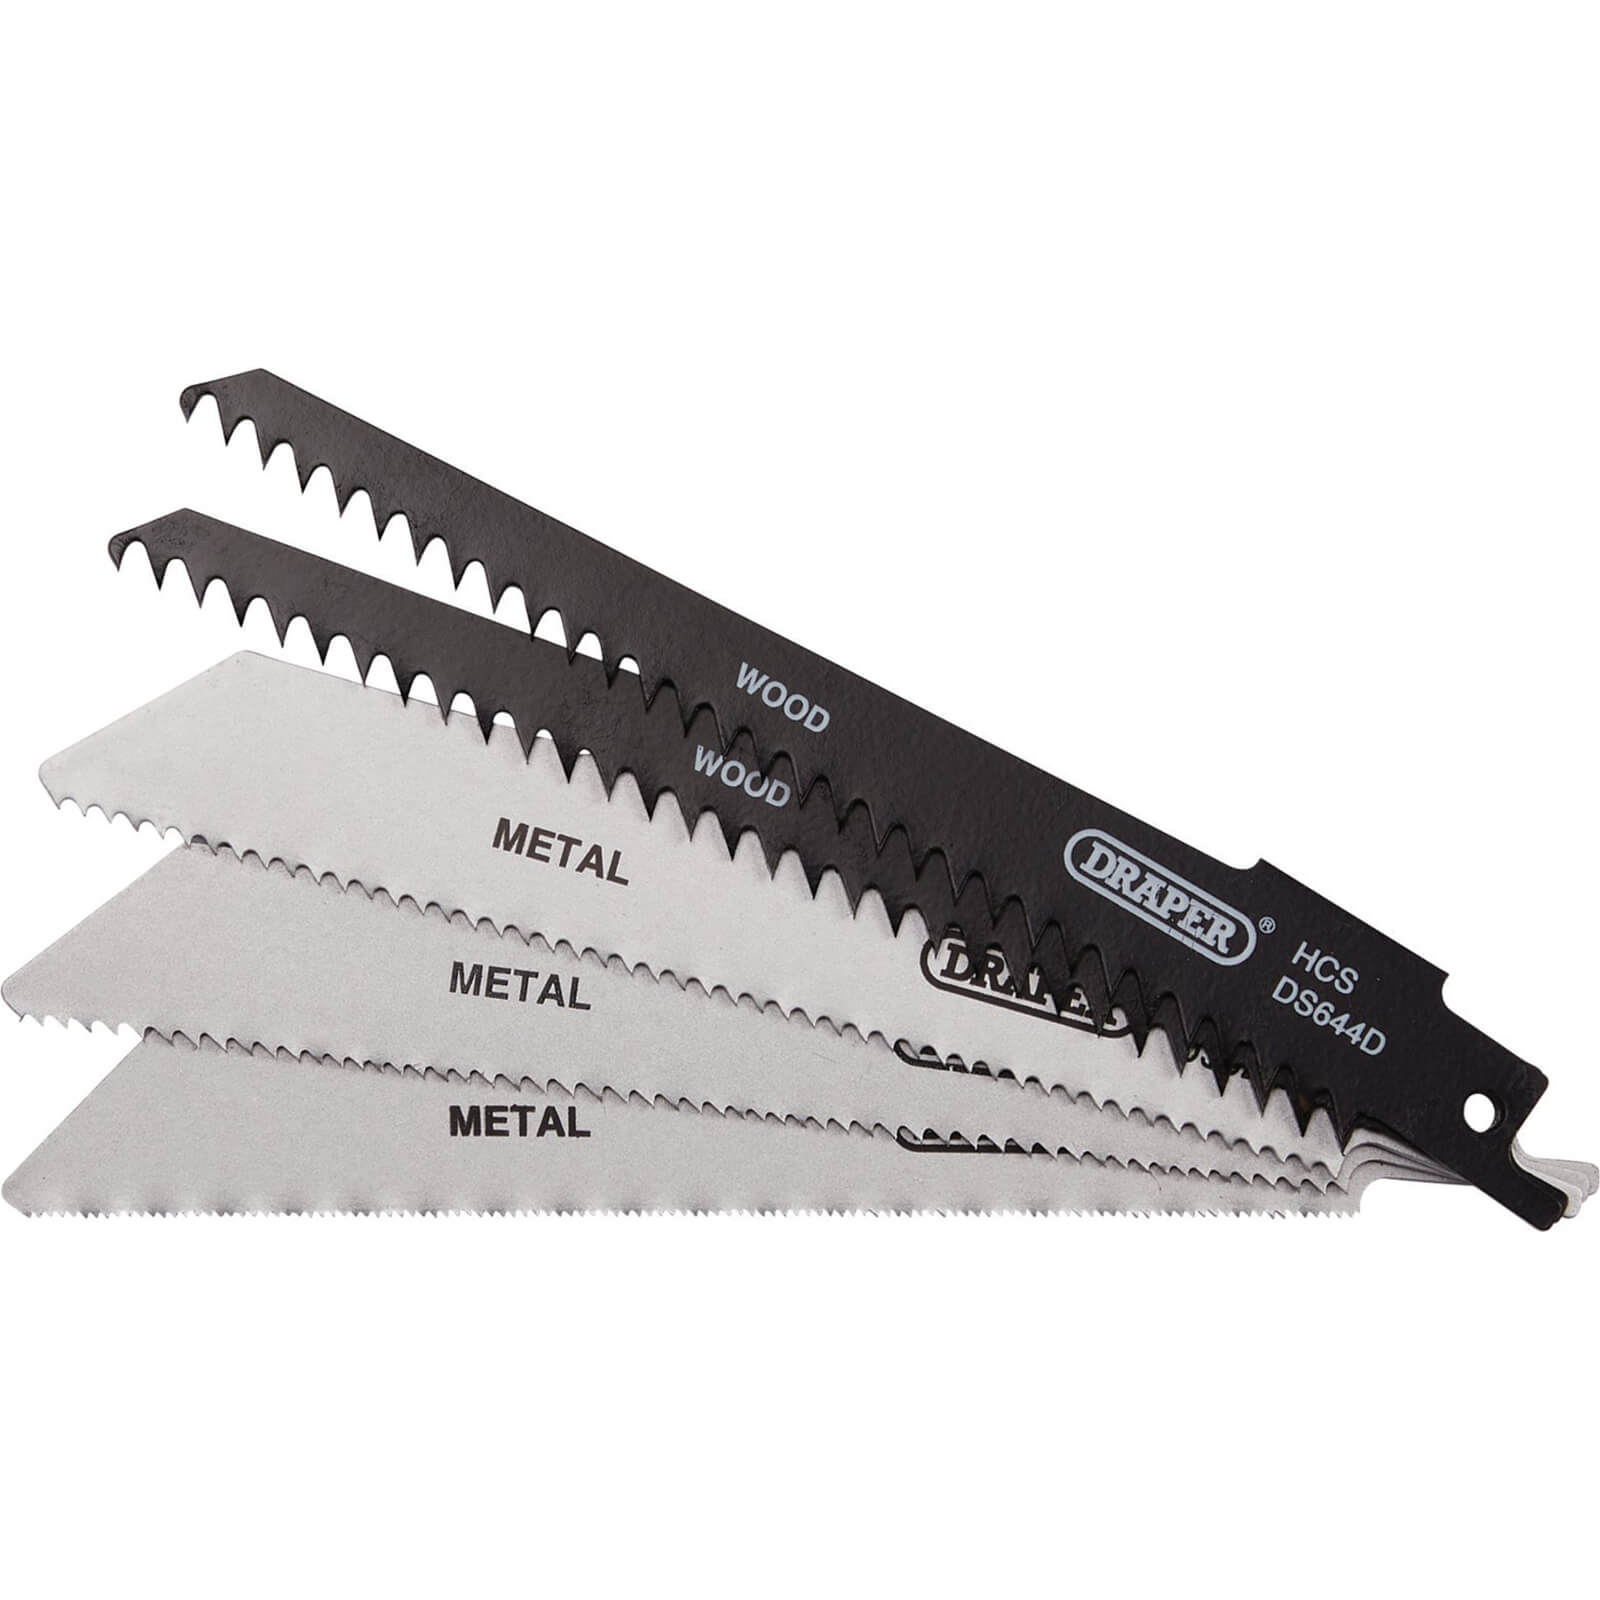 Photo of Draper 5 Piece Wood And Metal Cutting Reciprocating Saw Blade Set